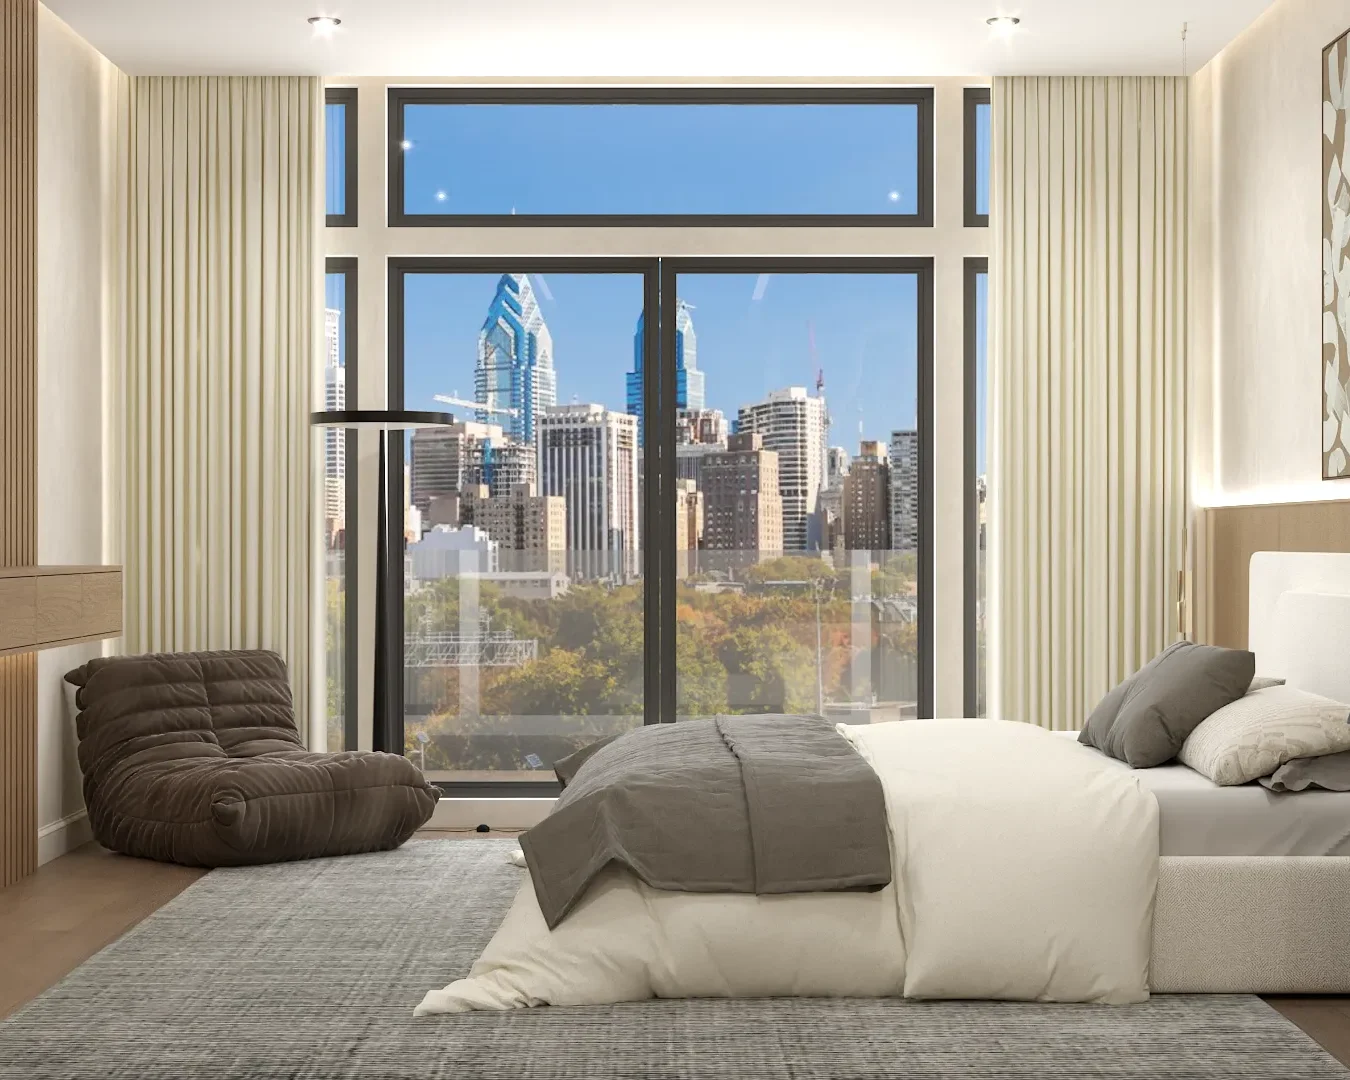 Modern bedroom with expansive New York City views through large windows, featuring a minimalist design and a neutral color palette that enhances the urban atmosphere. Design by Debora, an online interior design service.